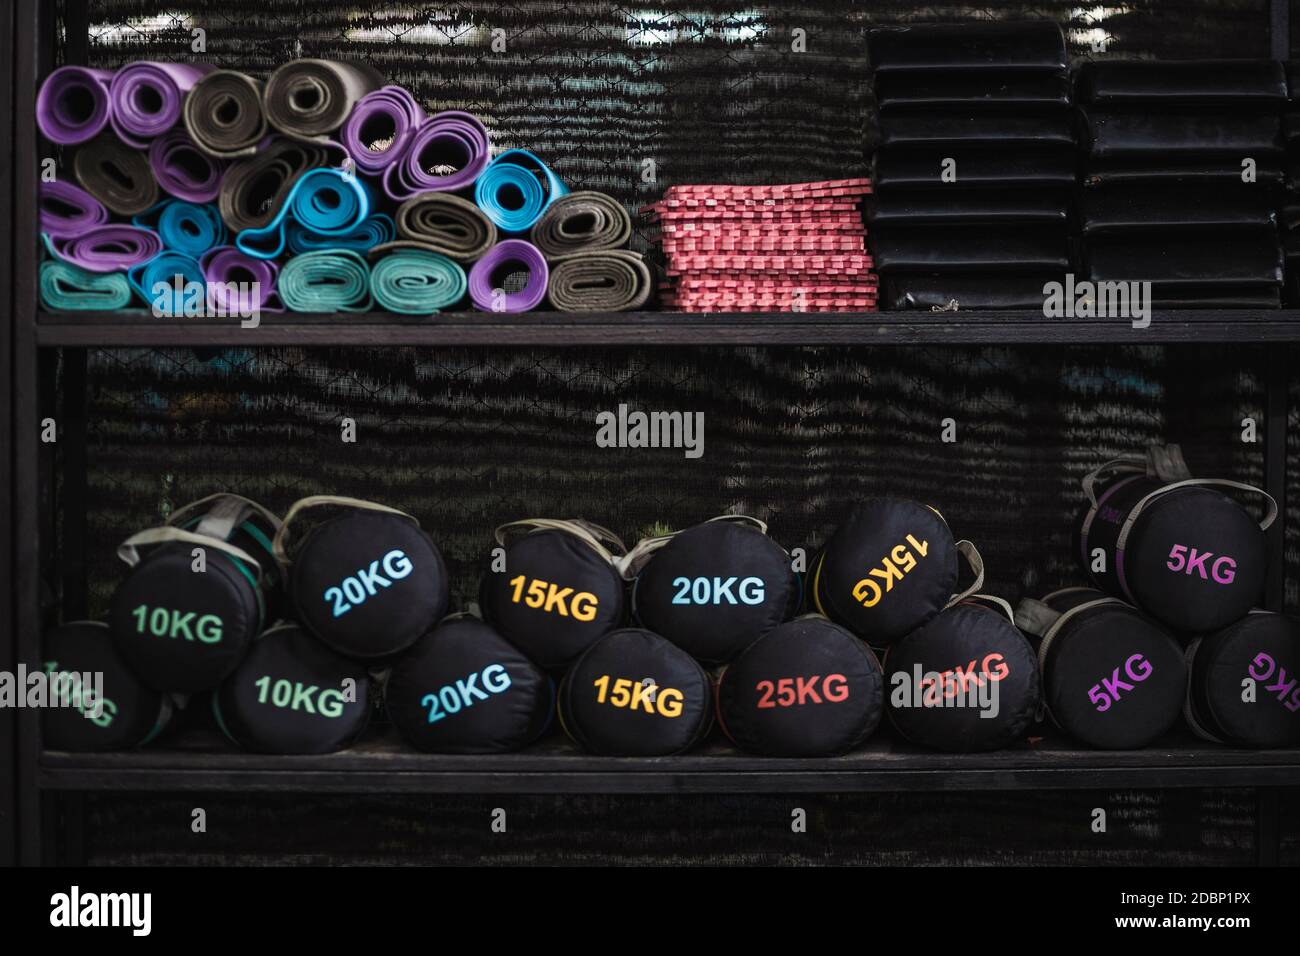 Weights and exercise mats on shelves in gym, Canggu, Bali, Indonesia Stock Photo